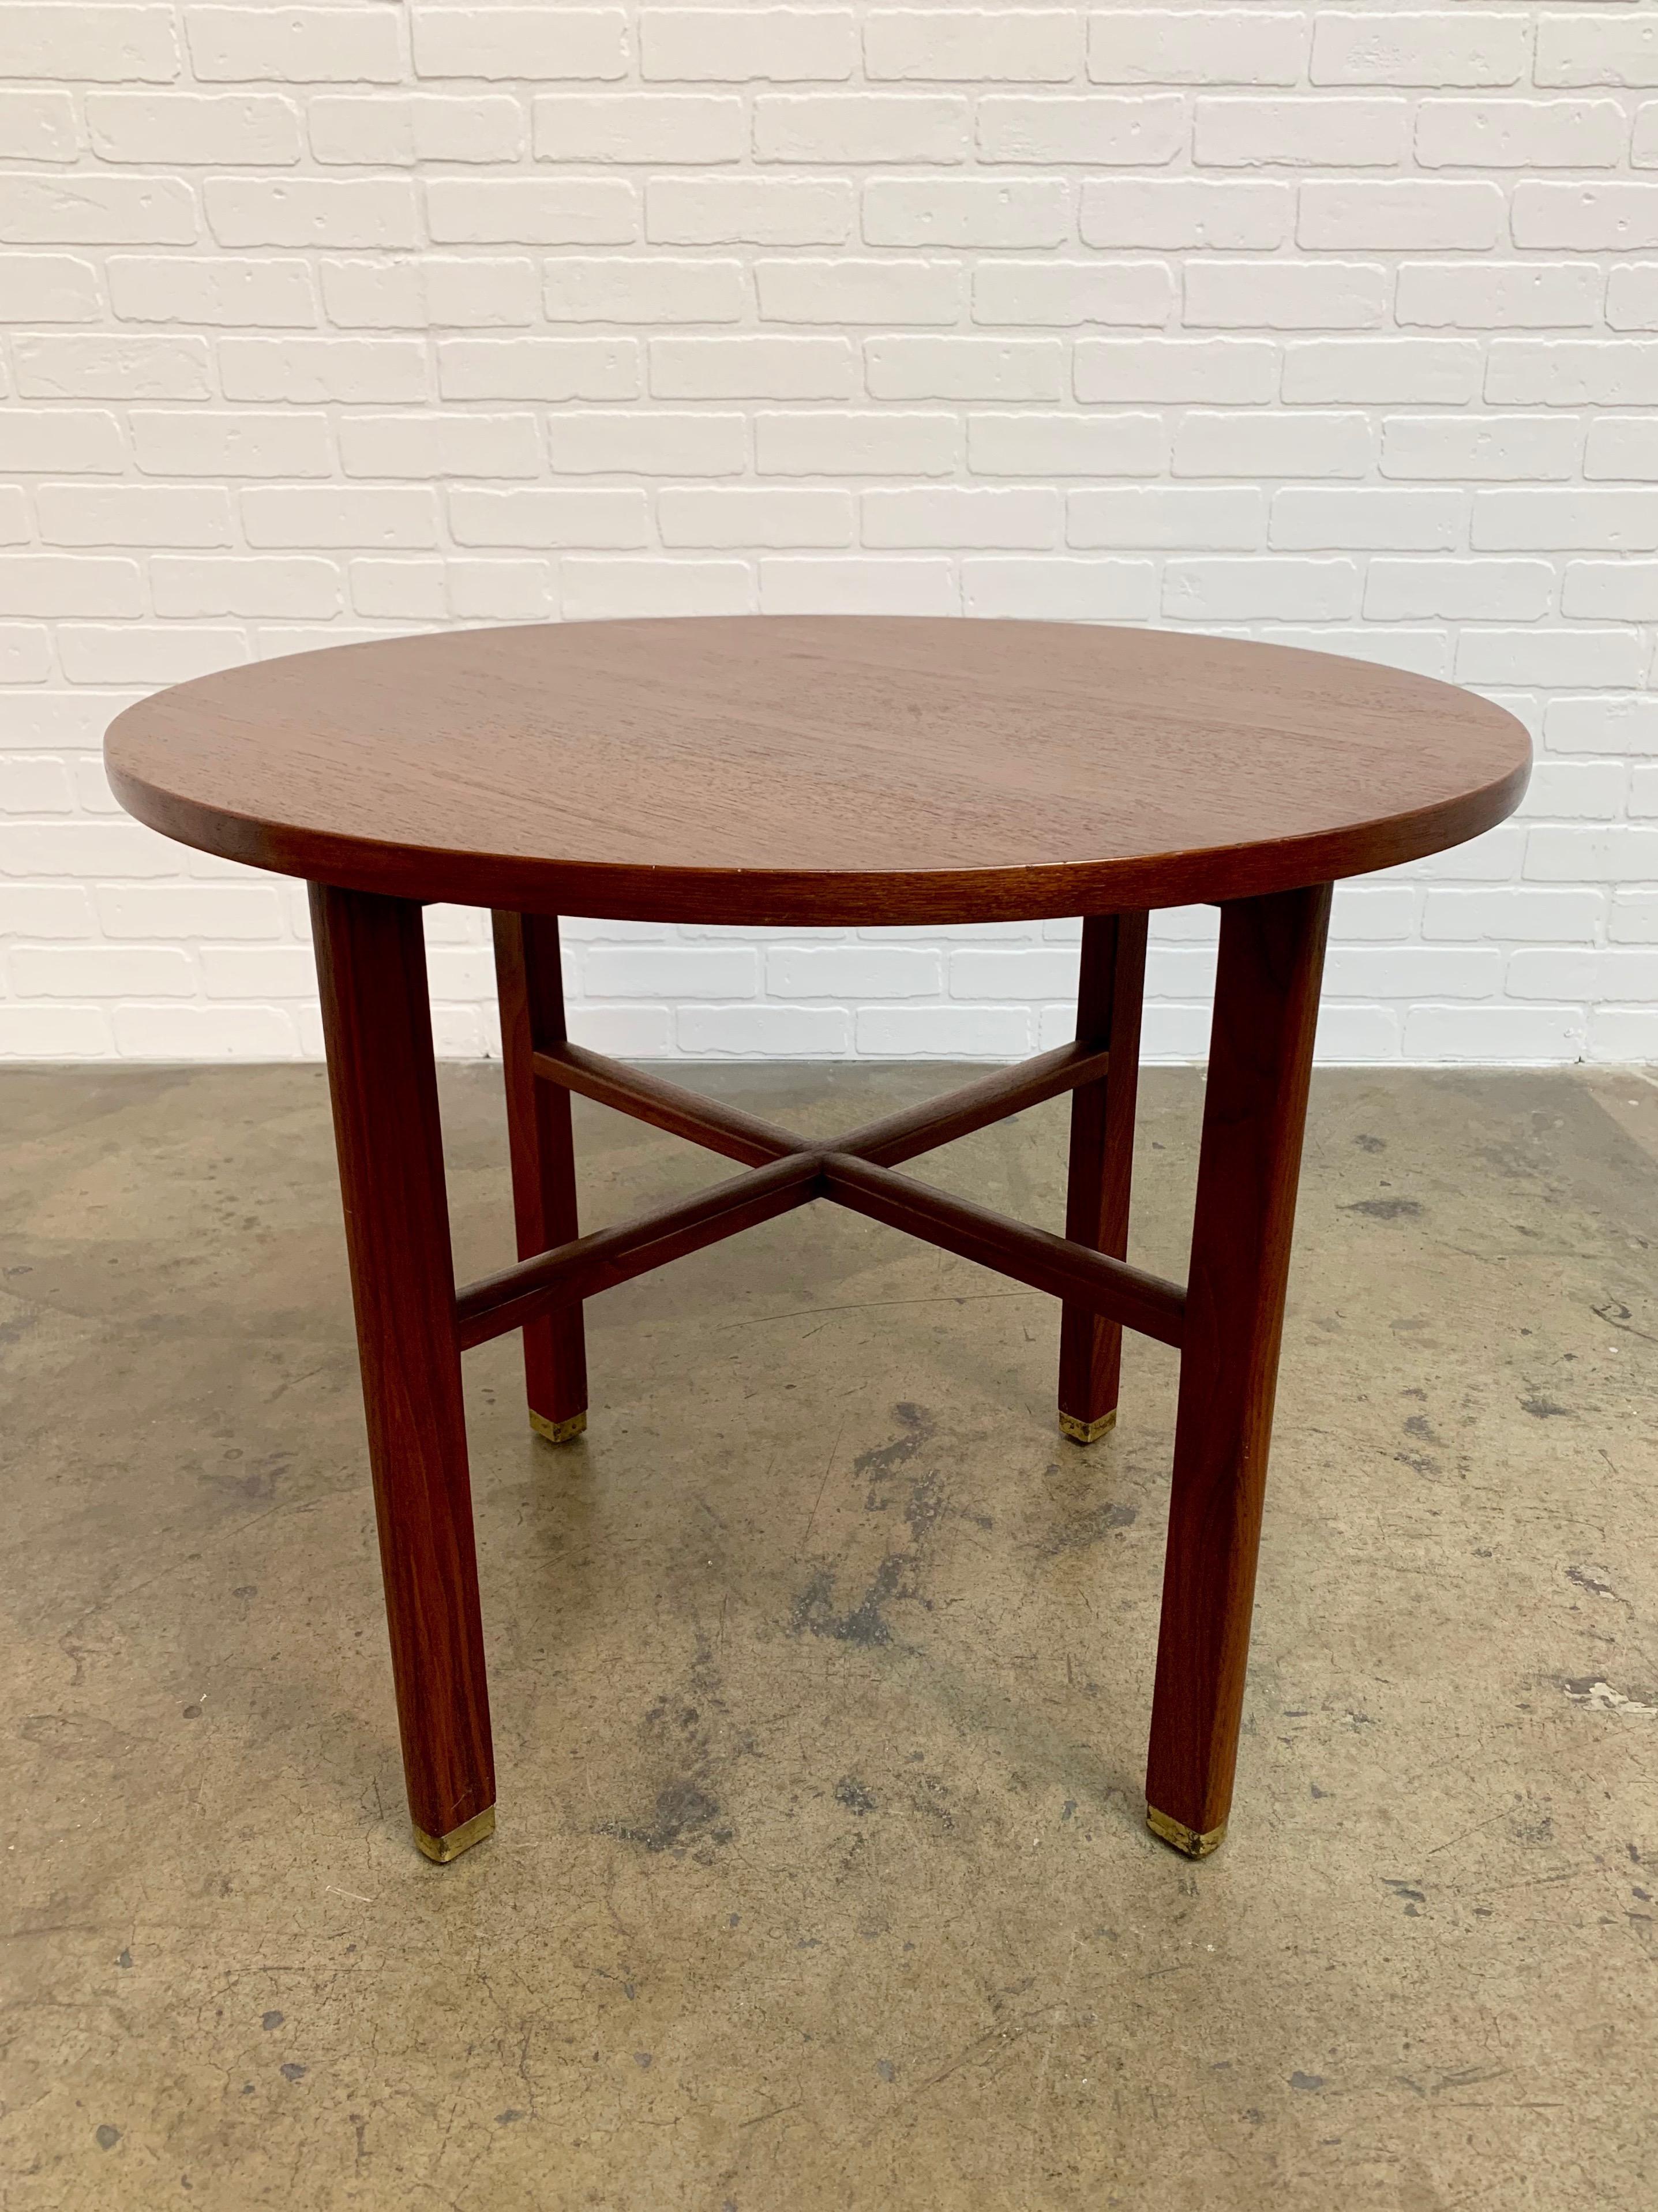 20th Century Round Occasional Table by Edward Wormley for Dunbar